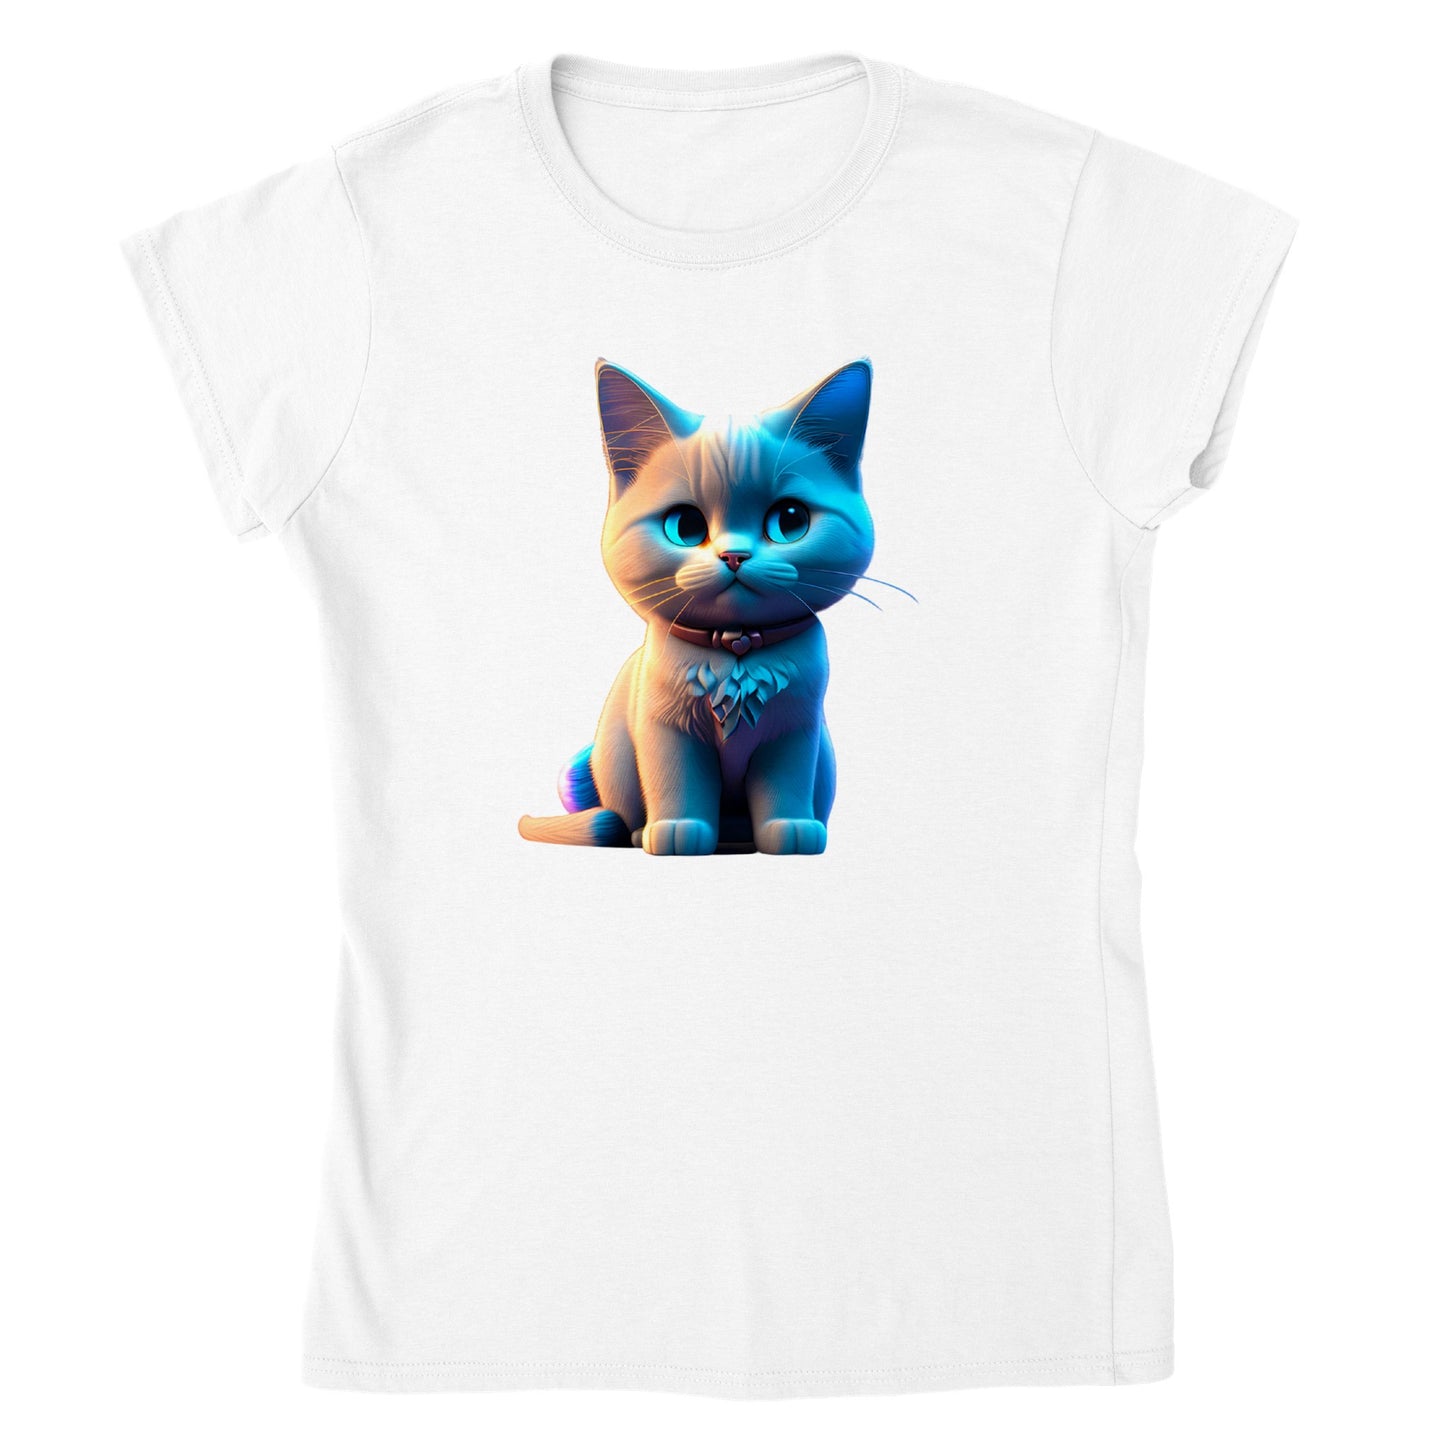 Adorable, Cool, Cute Cats and Kittens Toy - Classic Women’s Crewneck T-Shirt 34